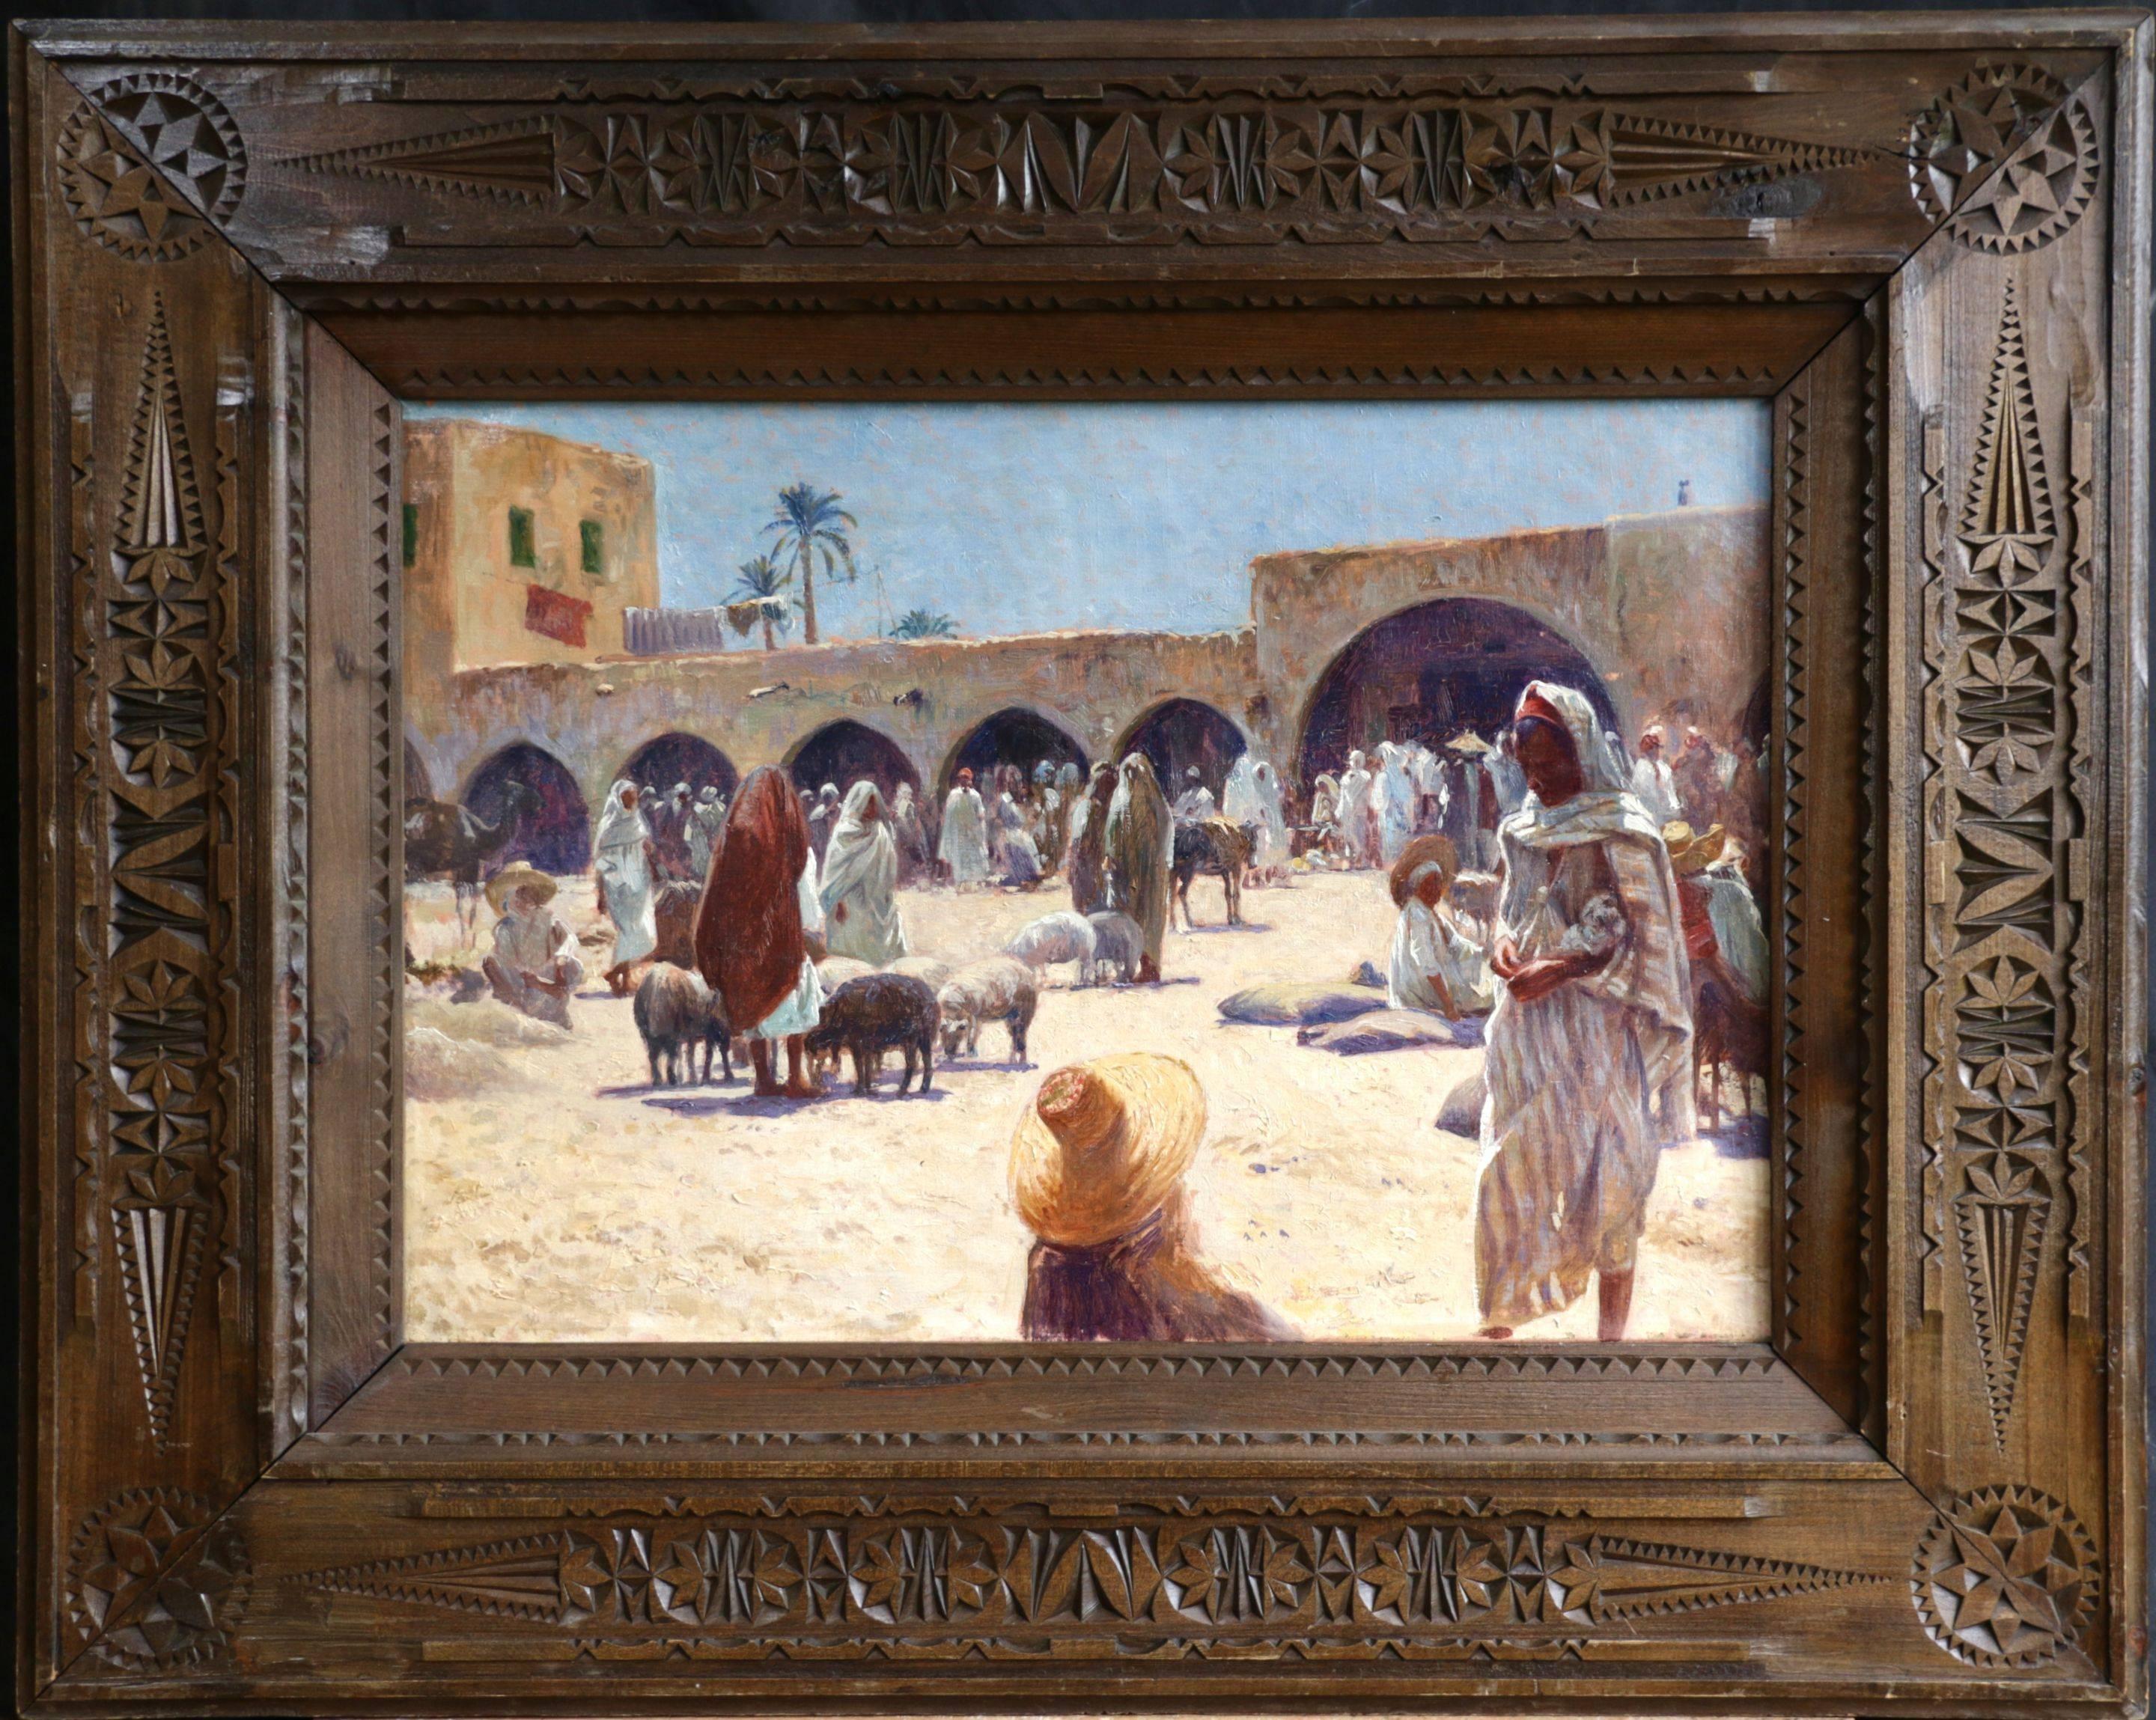 Market at Gabes - Tunisia - Painting by Alexis Auguste Delahogue